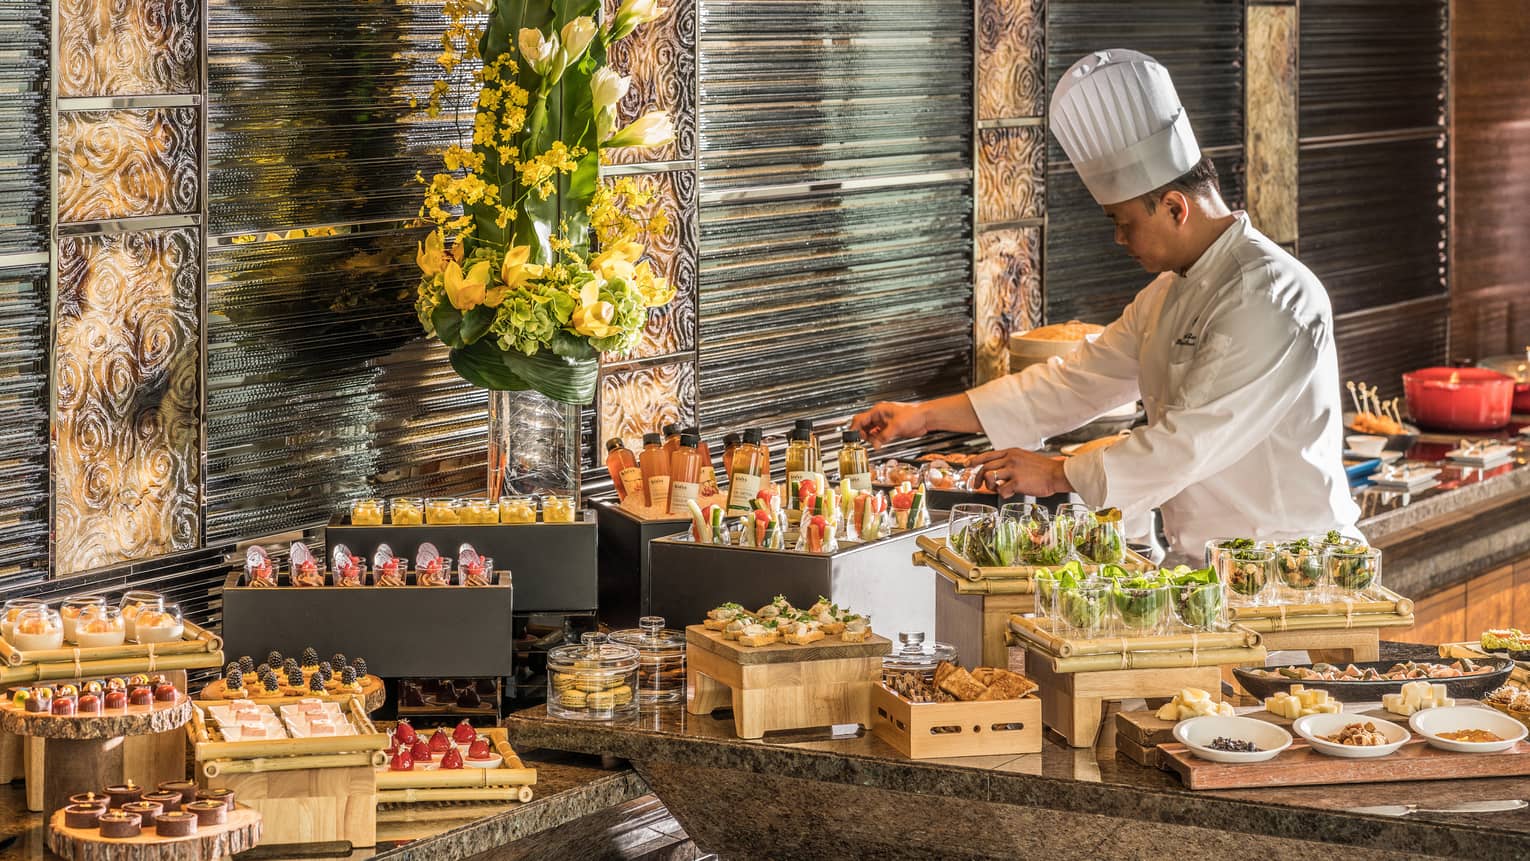 Chef in chef's uniform arranging bottled drinks and a variety of buffet dishes